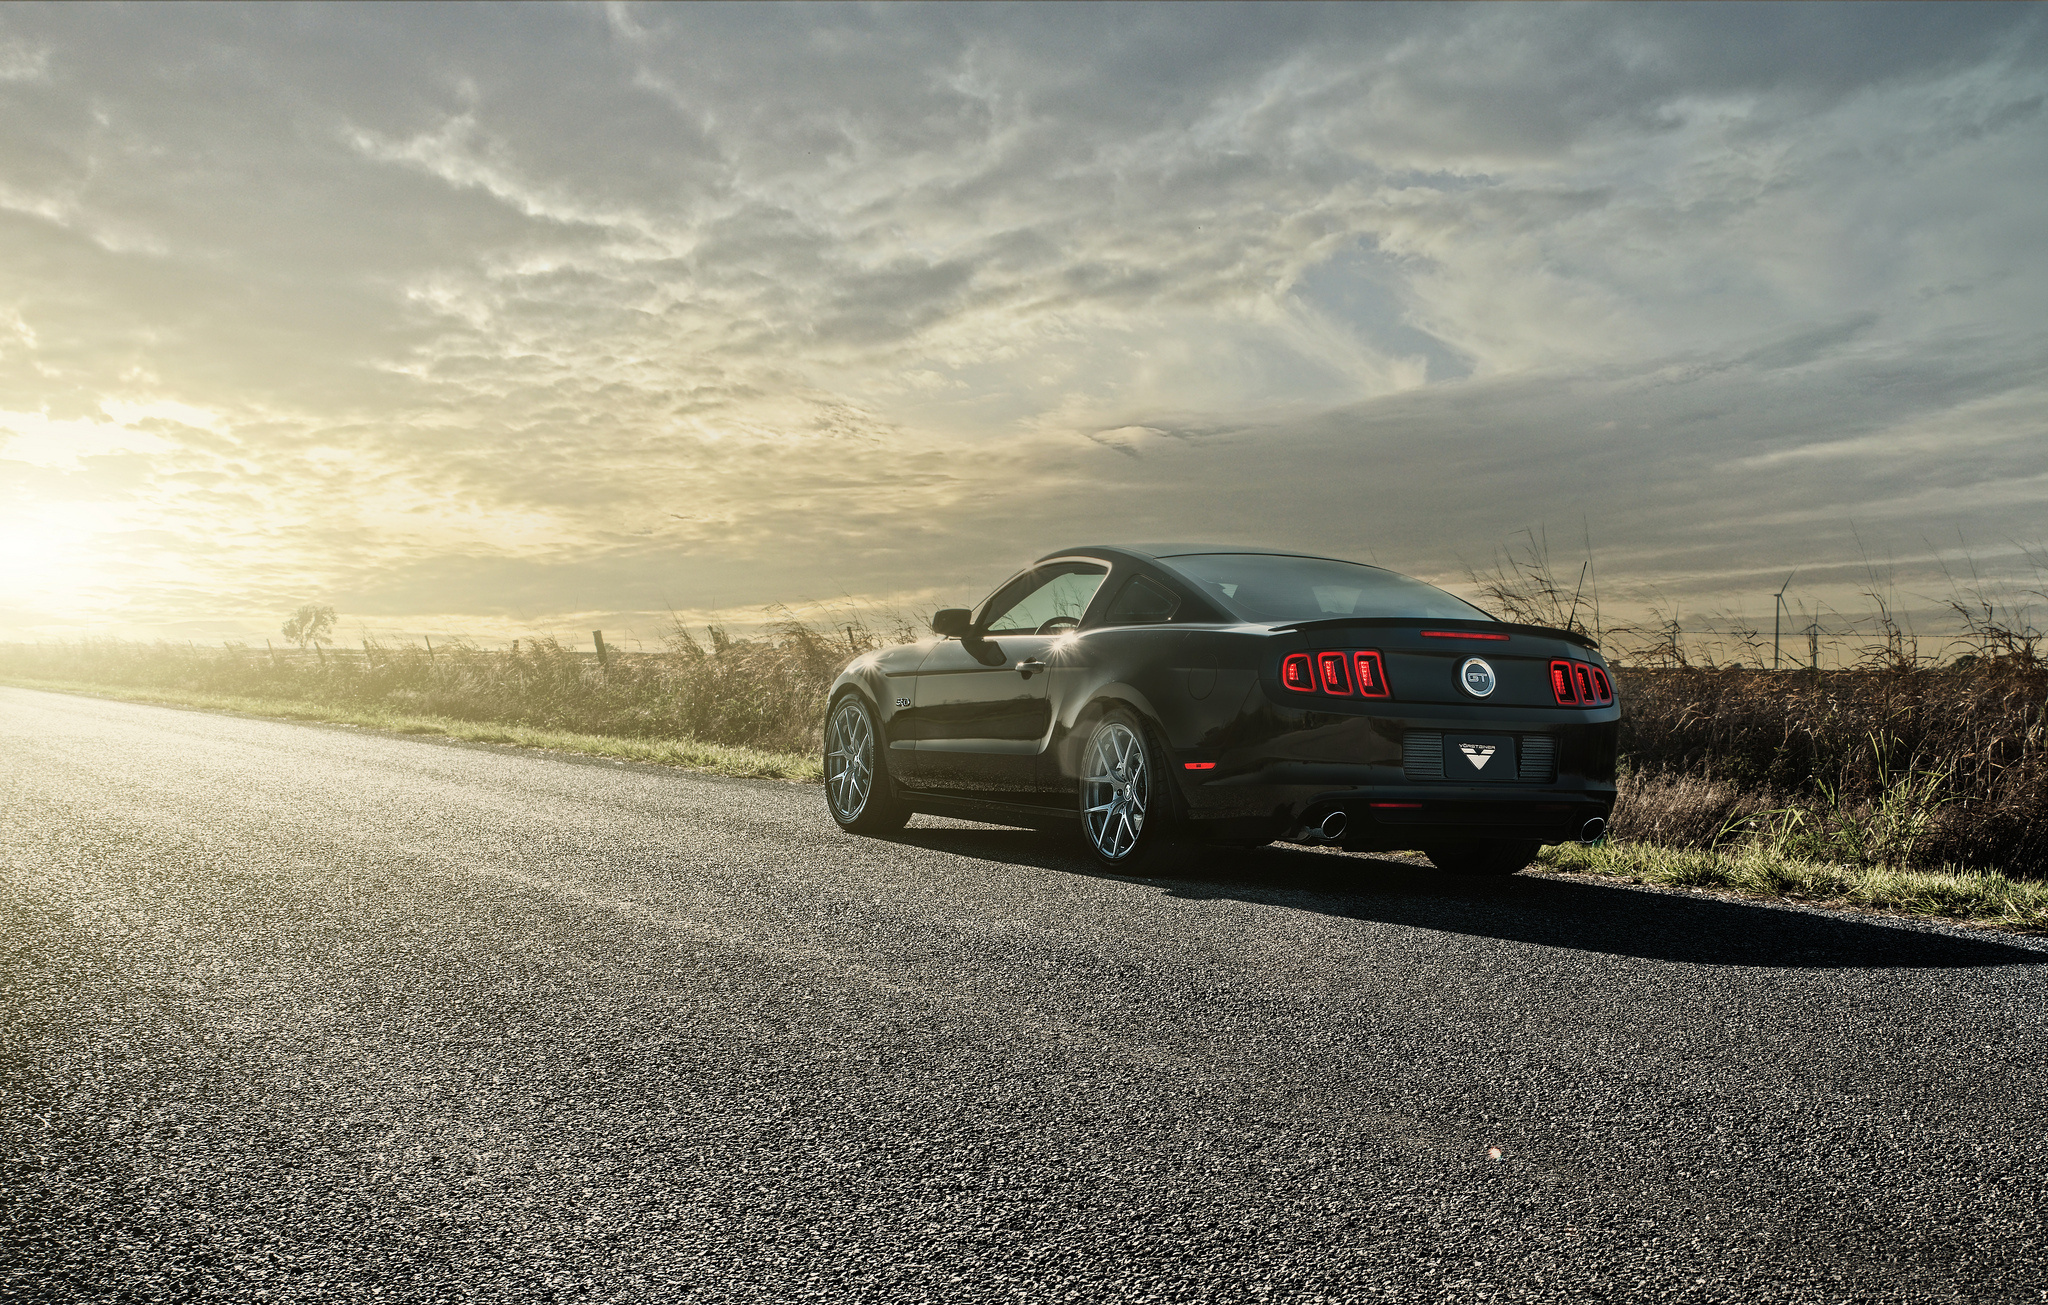 Download background auto, mustang, cars, shine, light, road, back view, rear view, gt